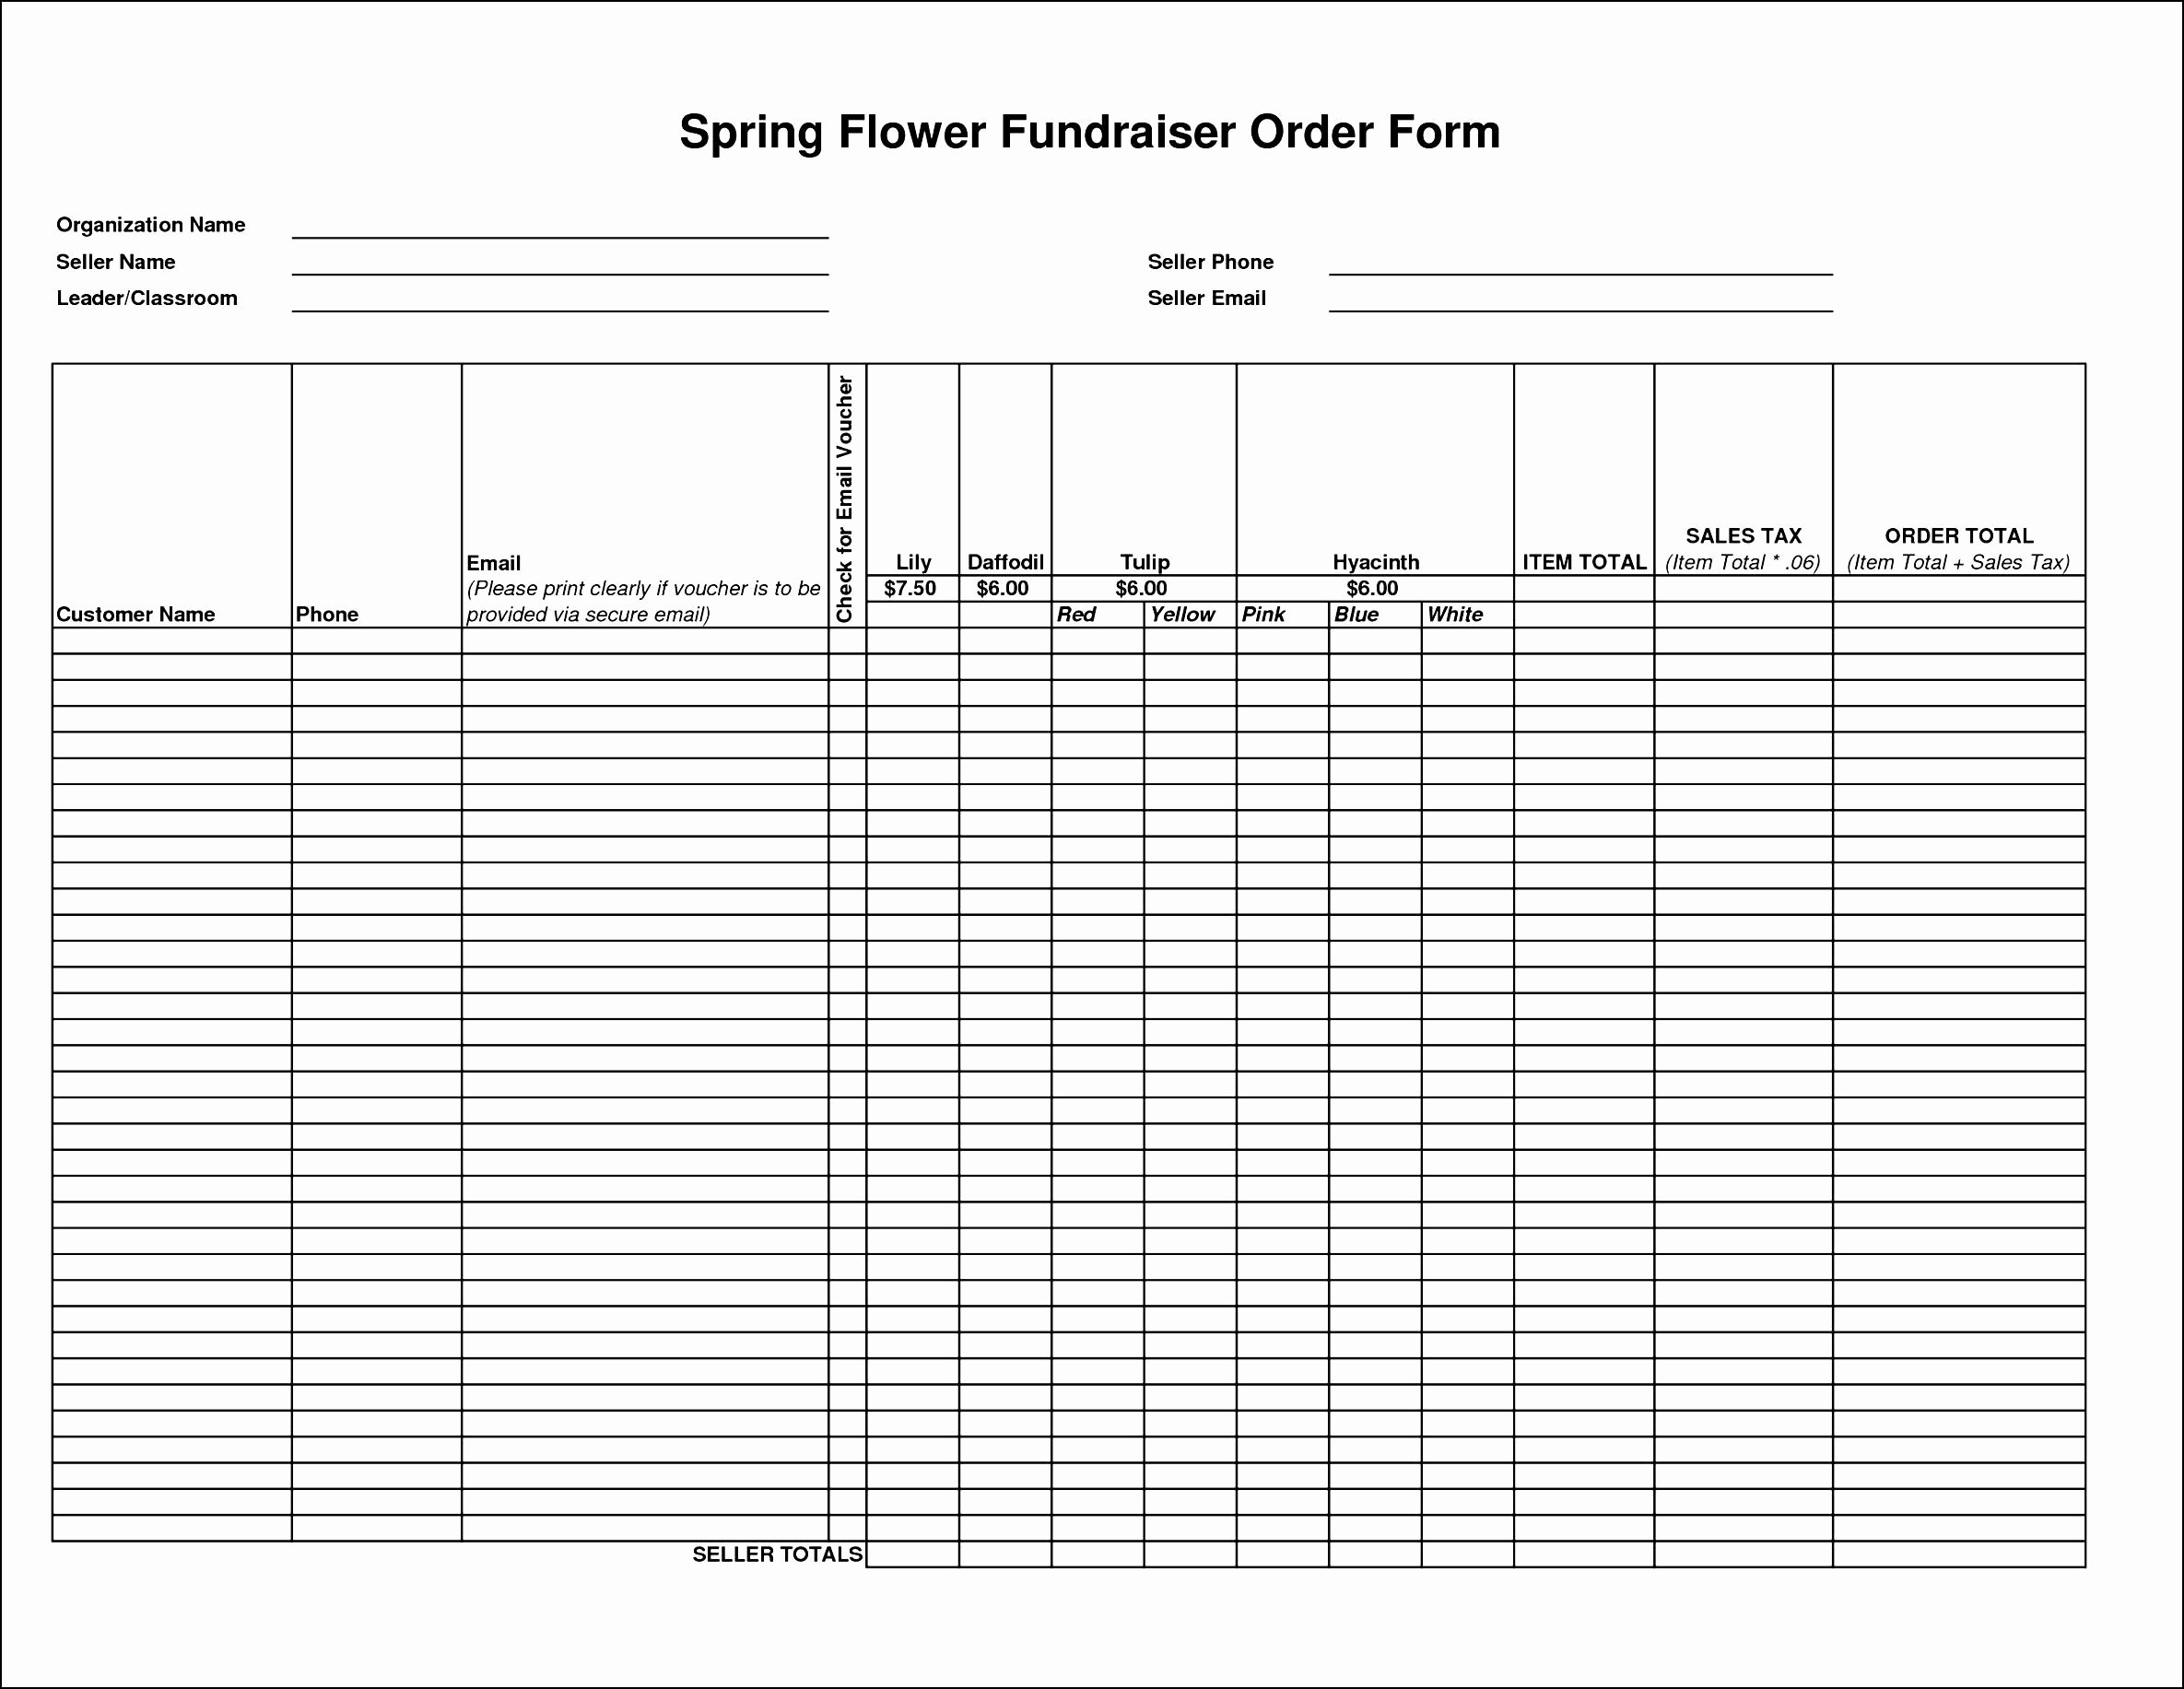 Fundraiser form Template Free Elegant Collection solutions Flower Fundraiser order forms